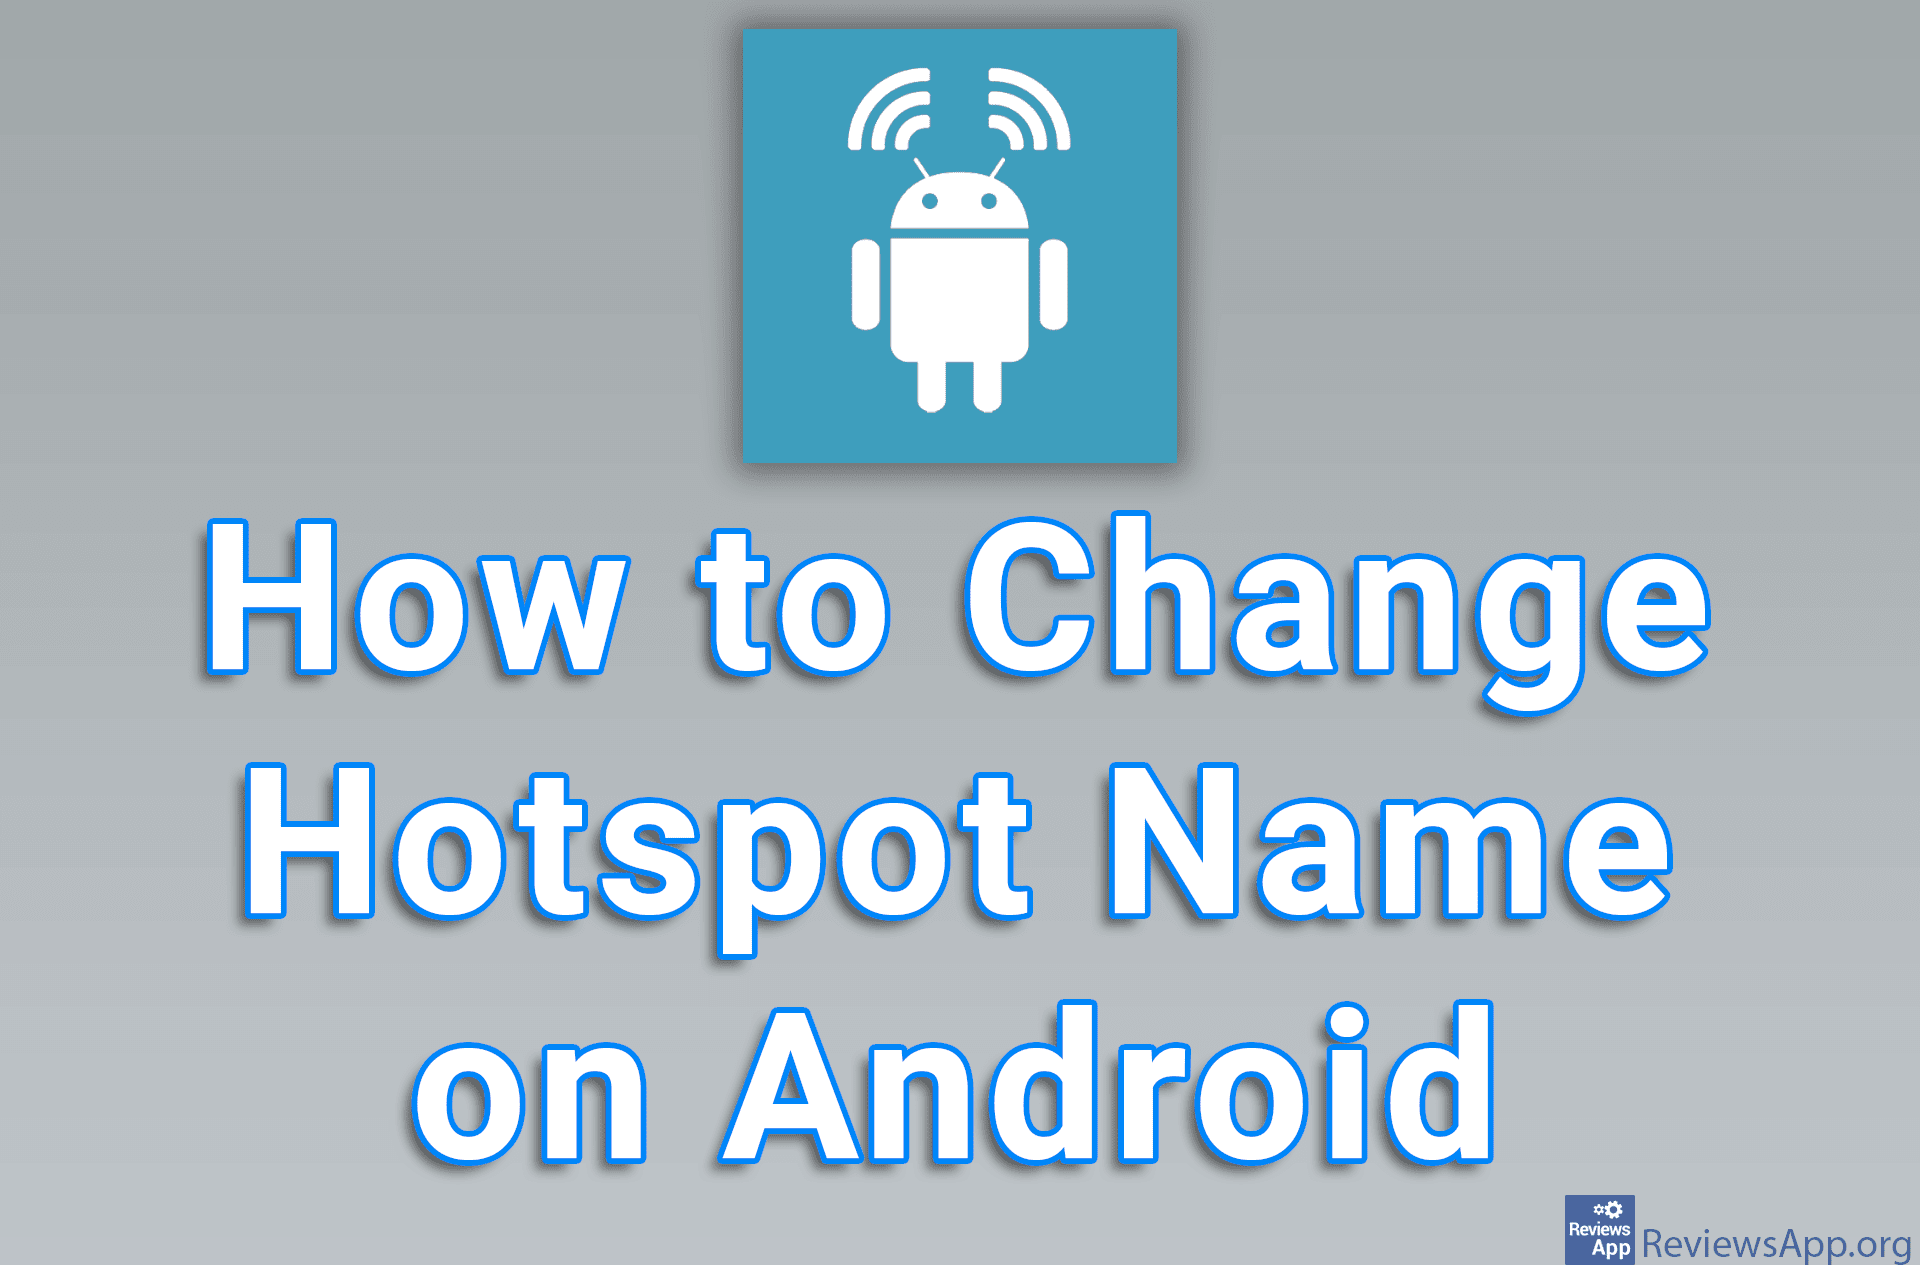 How to Change Hotspot Name on Android